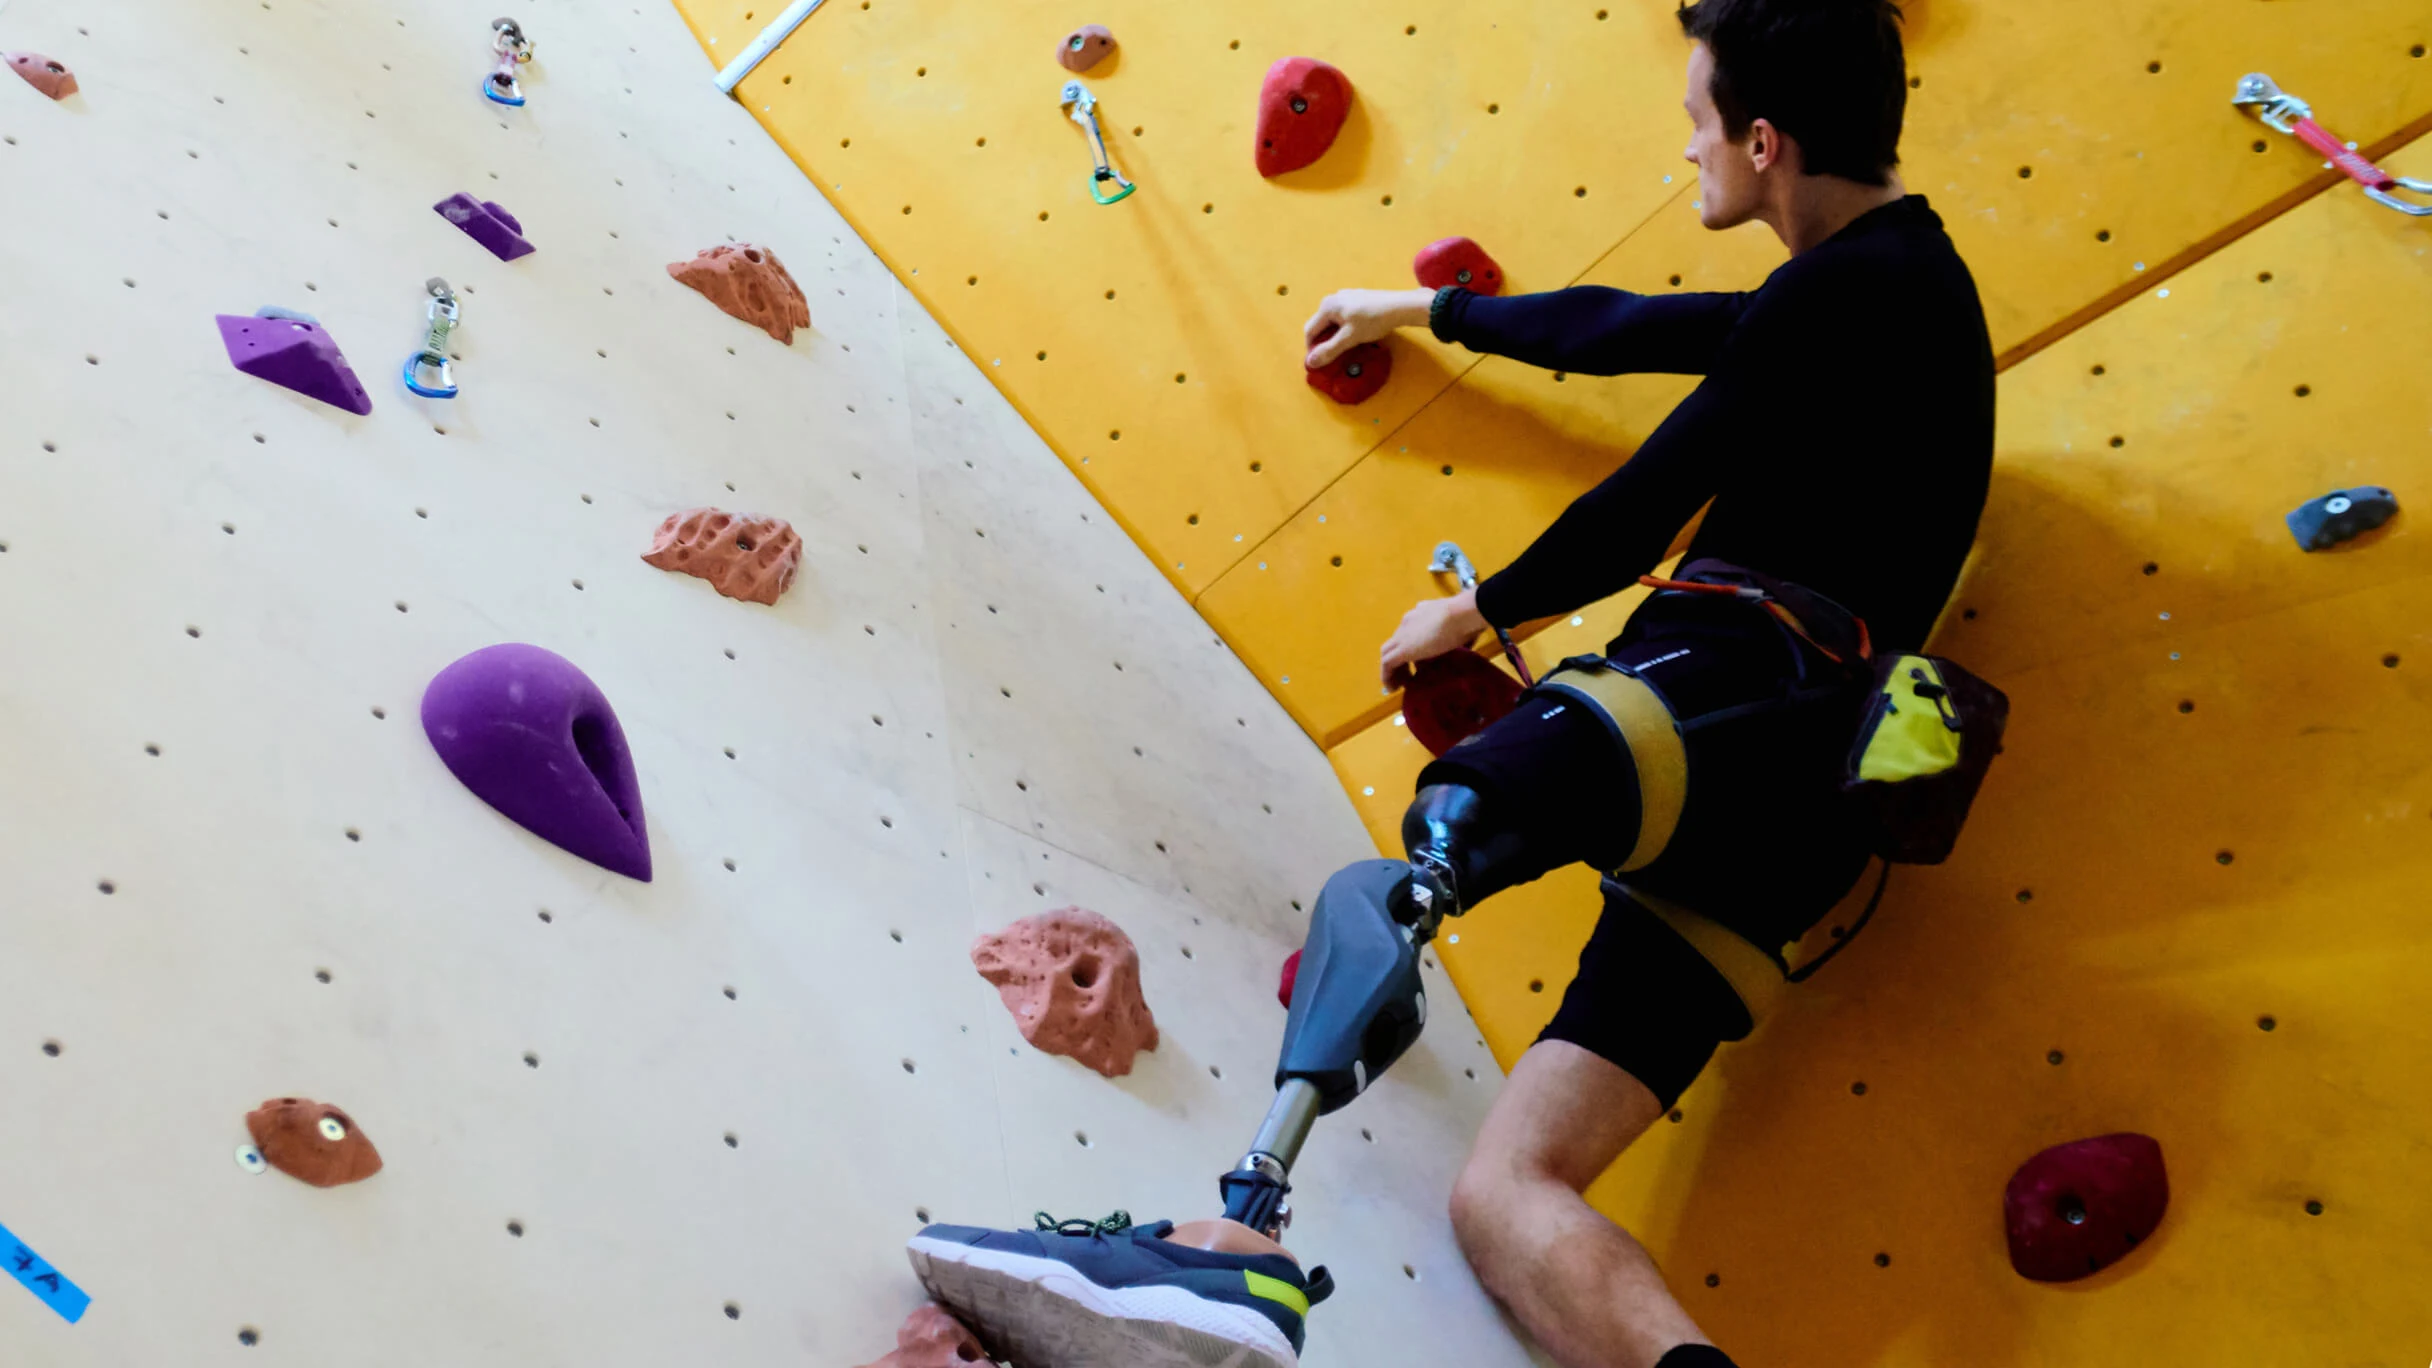 Man with prosthetic leg, dressed in black, ascends a colorful climbing wall